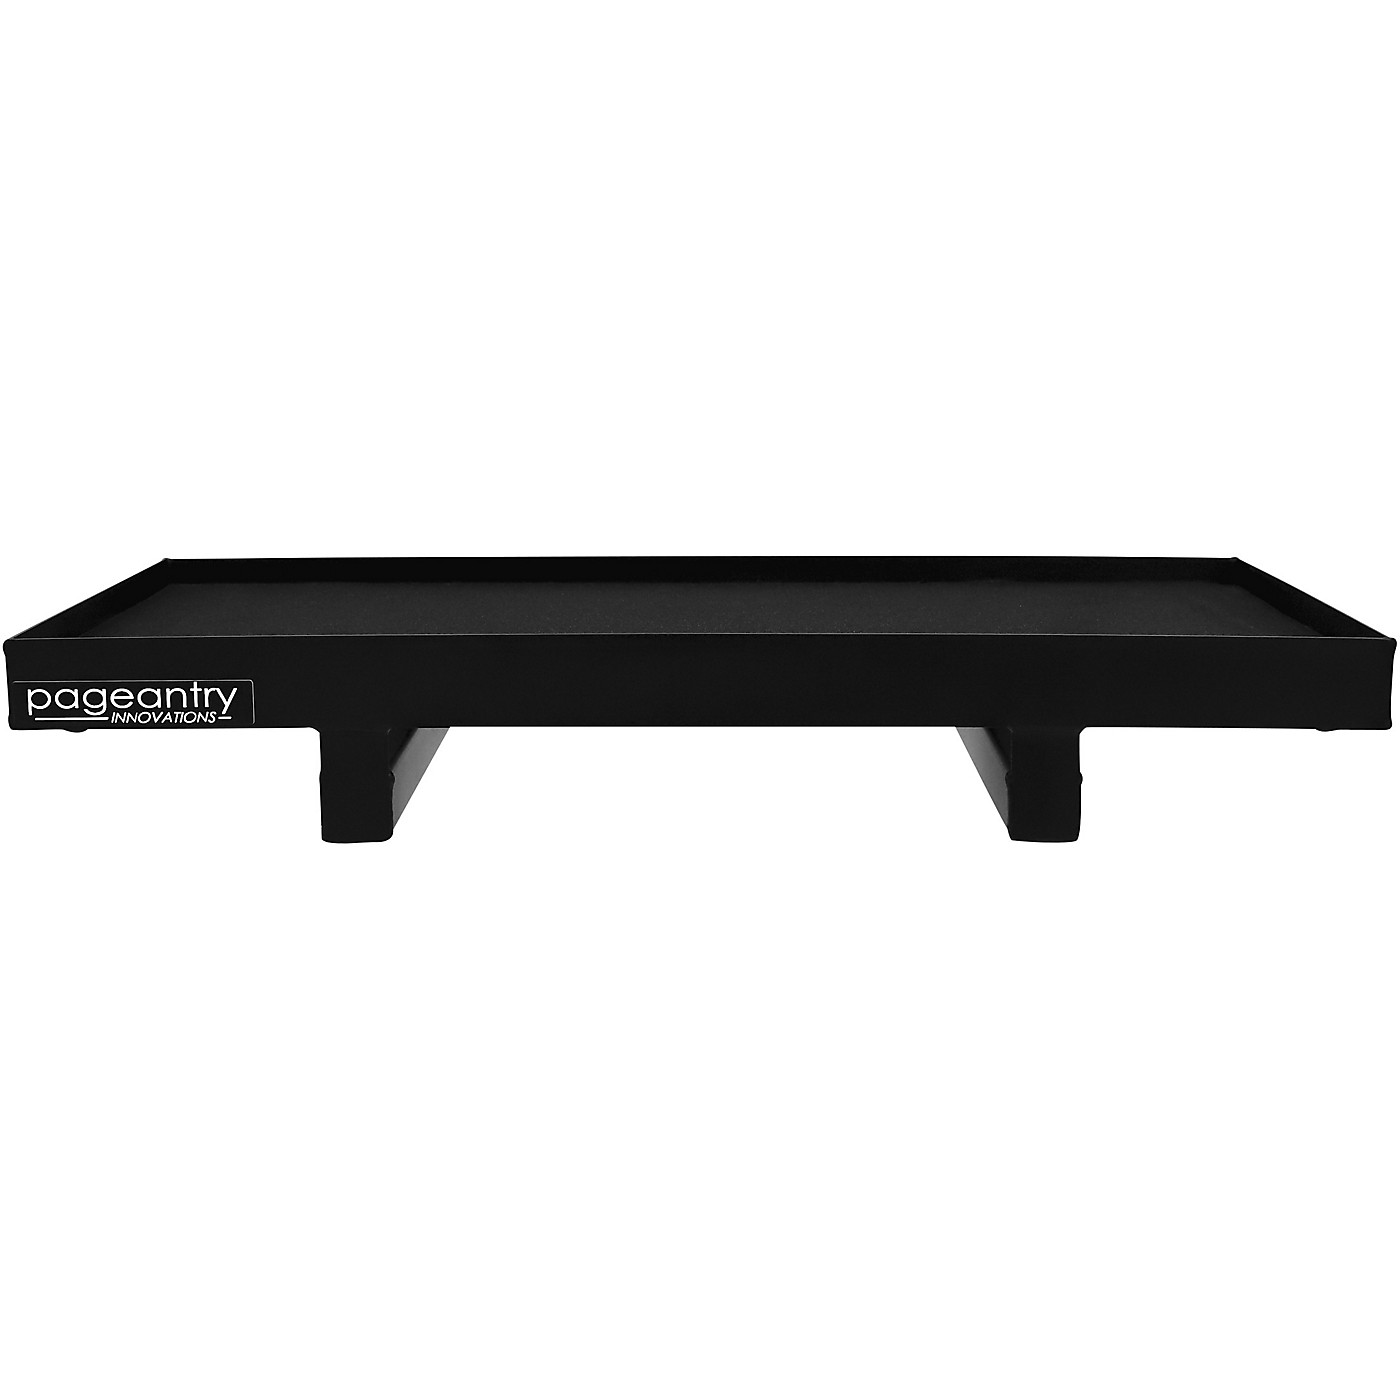 Pageantry Innovations Large Tray Table thumbnail